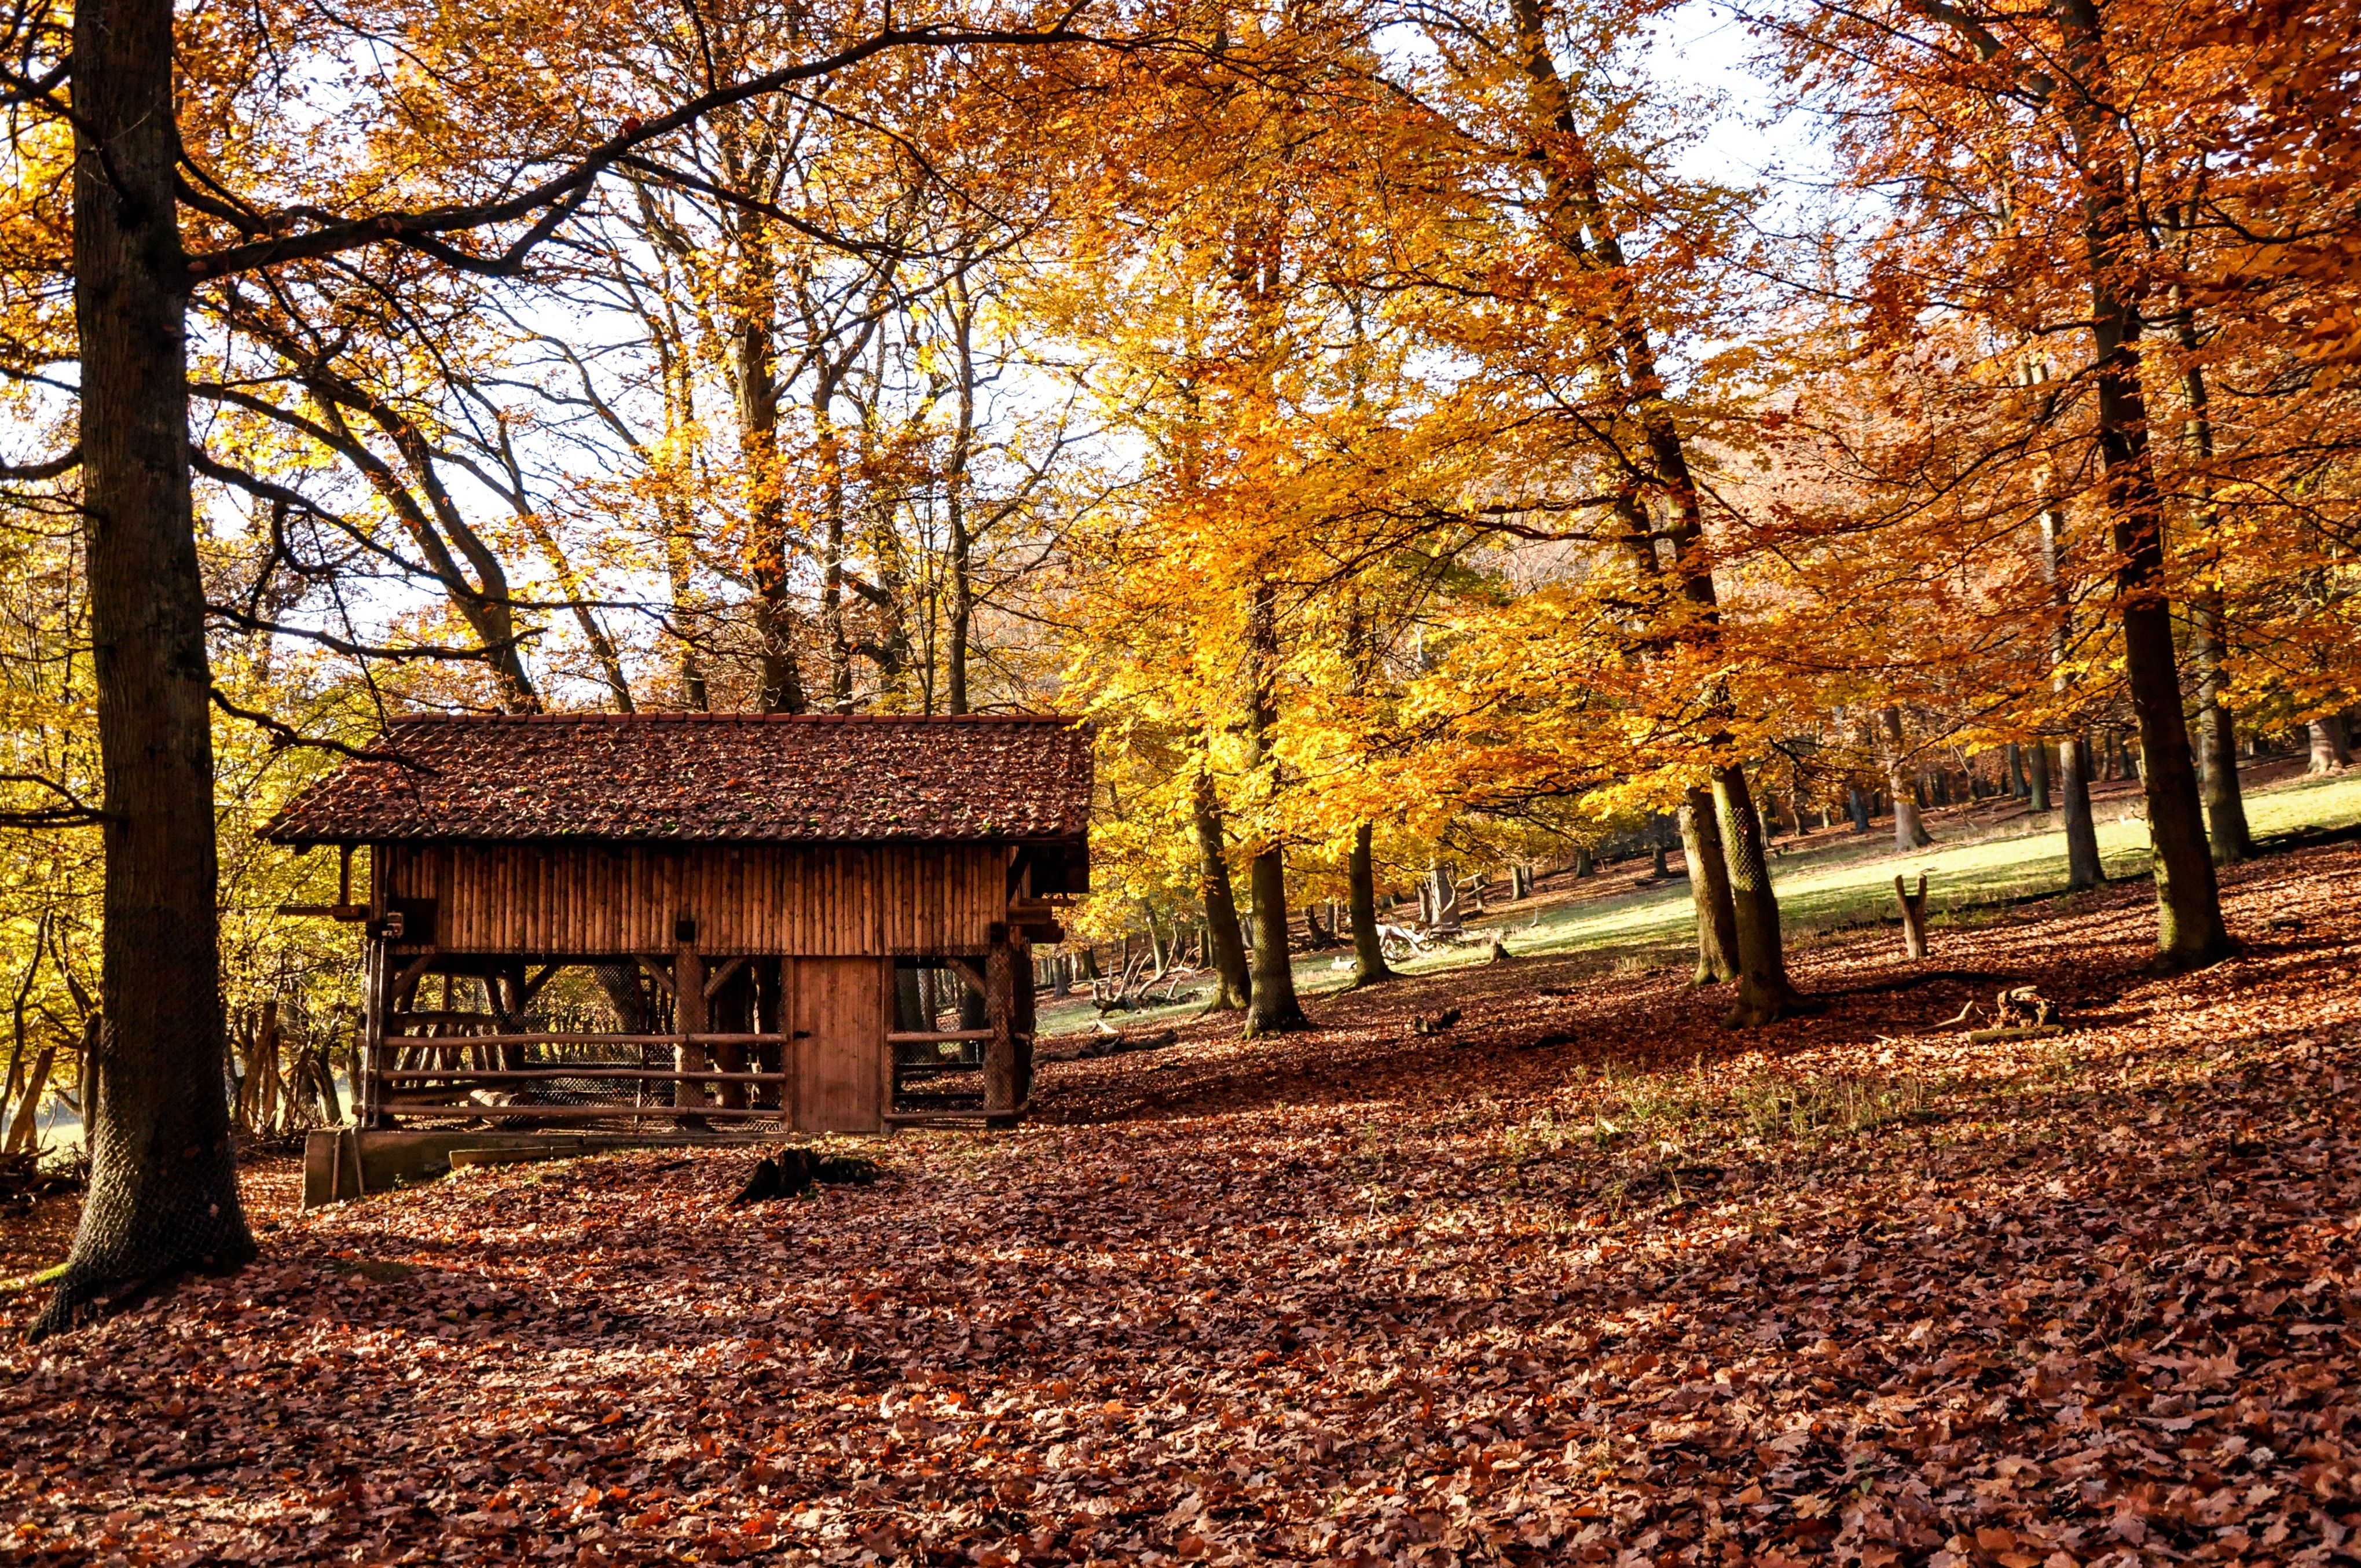 4078x2709 building, log house, forest, autumn, barn, log cabin, fall, countryside, shed, leaf, Creative Commons image, architecture, rustic, wooden, cabin, farm, rural, shack, wood, gold, tree. Mocah.org HD Desktop Wallpaper